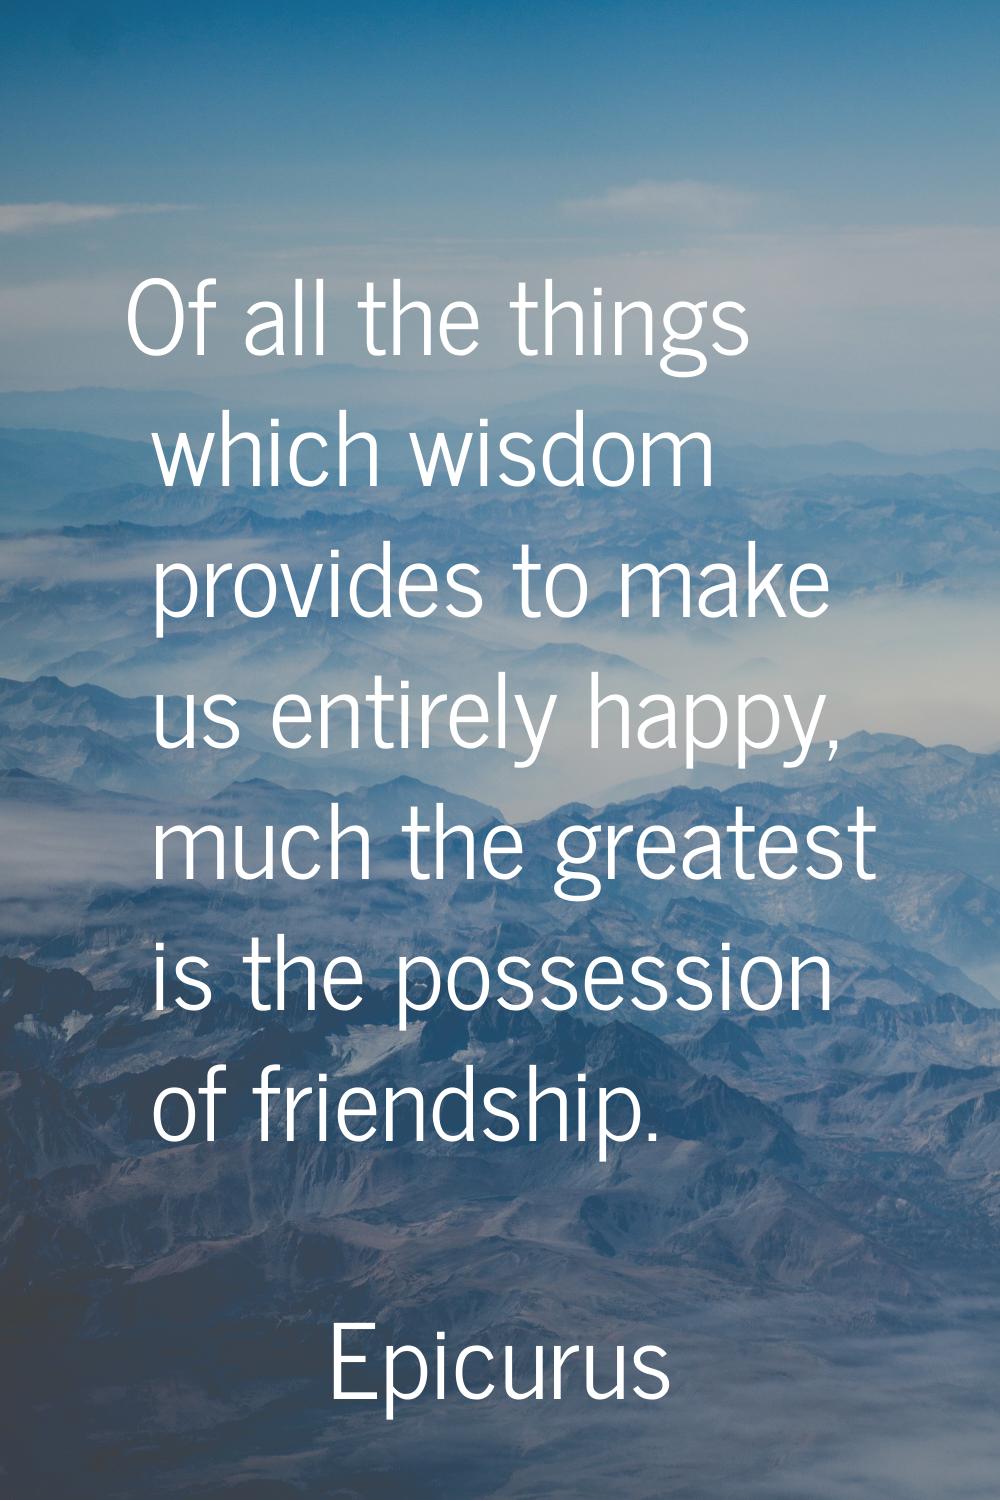 Of all the things which wisdom provides to make us entirely happy, much the greatest is the possess